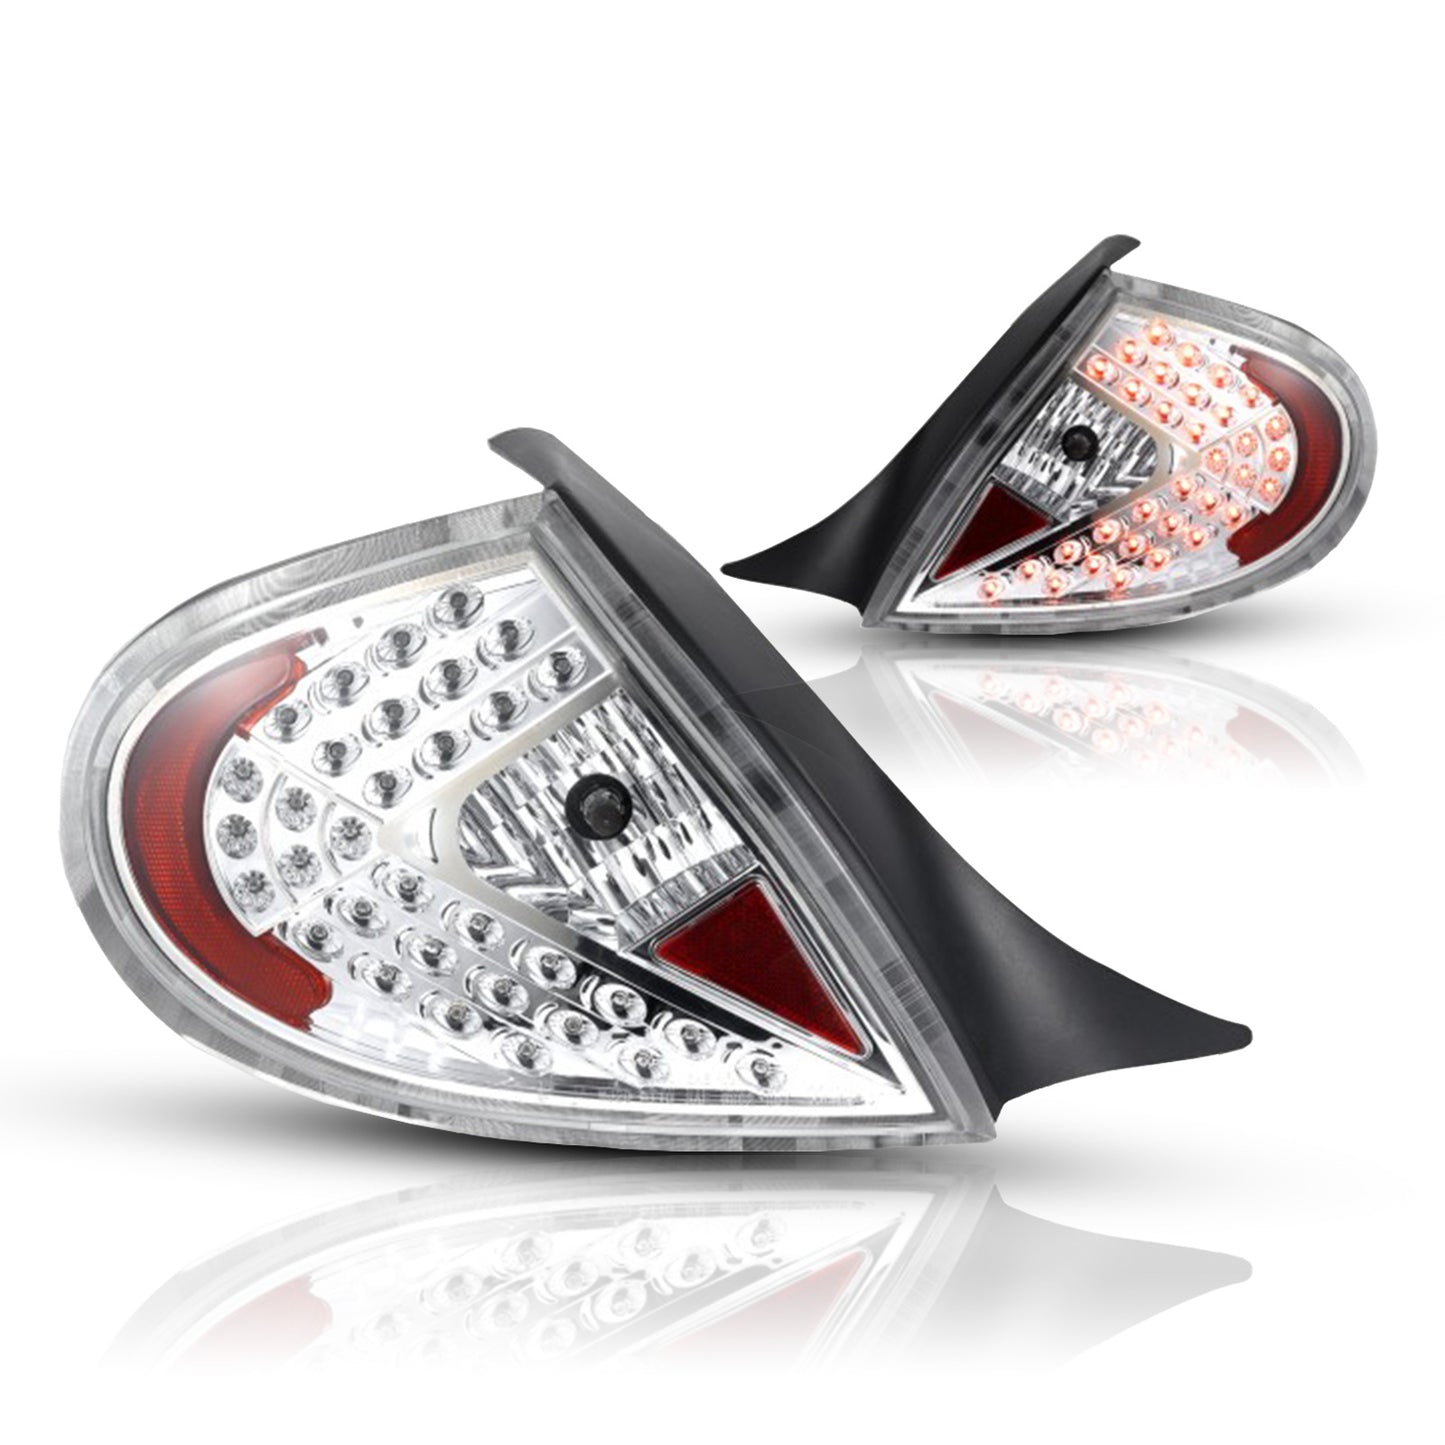 2000-2002 Dodge Neon/2000-2001 Plymouth Neon LED Tail Light - Chrome/Clear